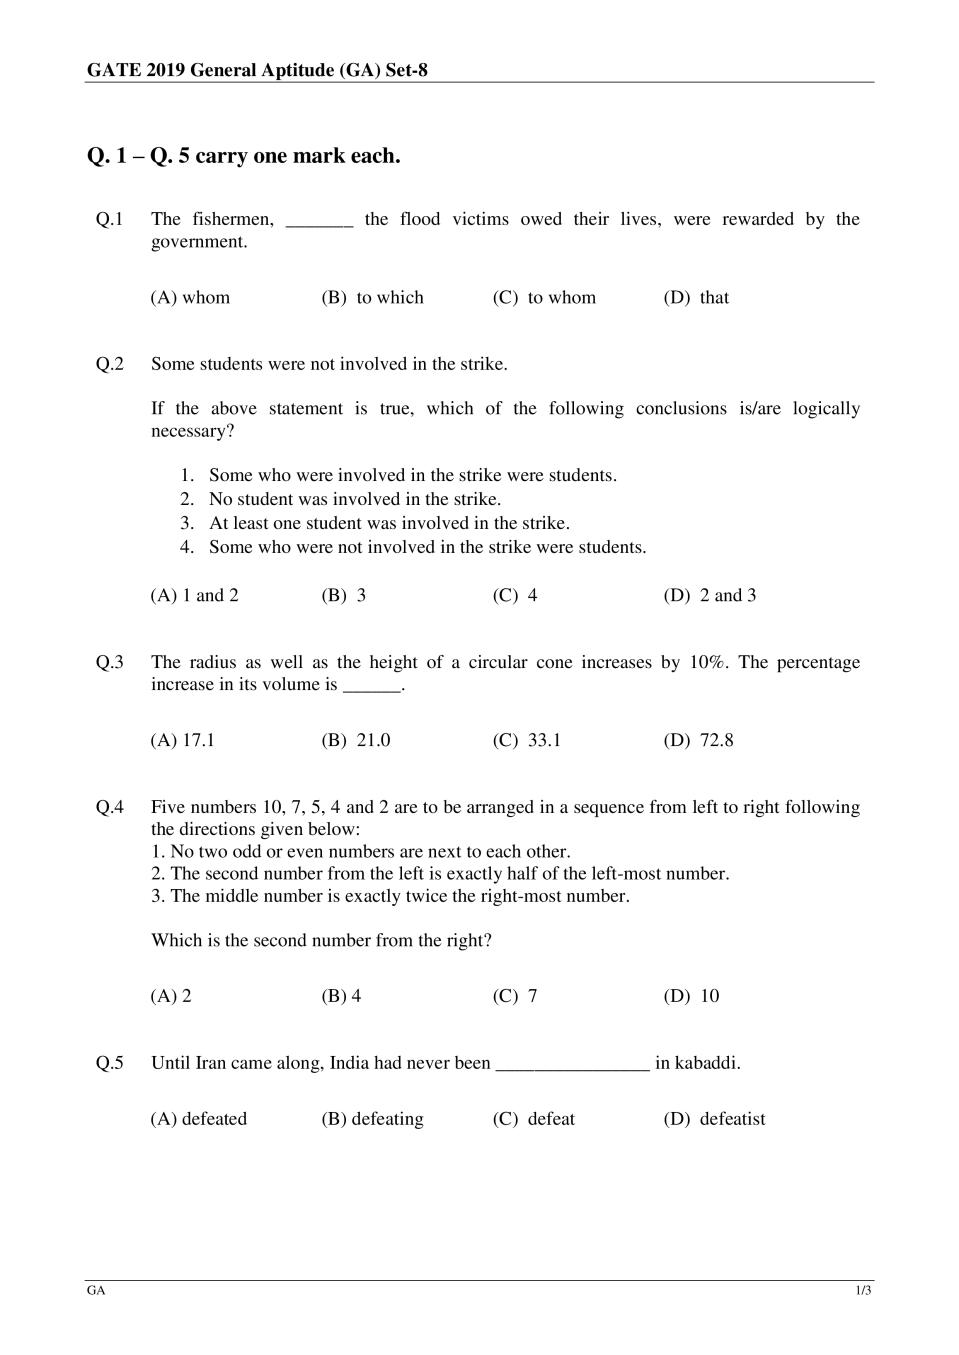 GATE 2019 Physics (PH) Question Paper with Answer - Page 1